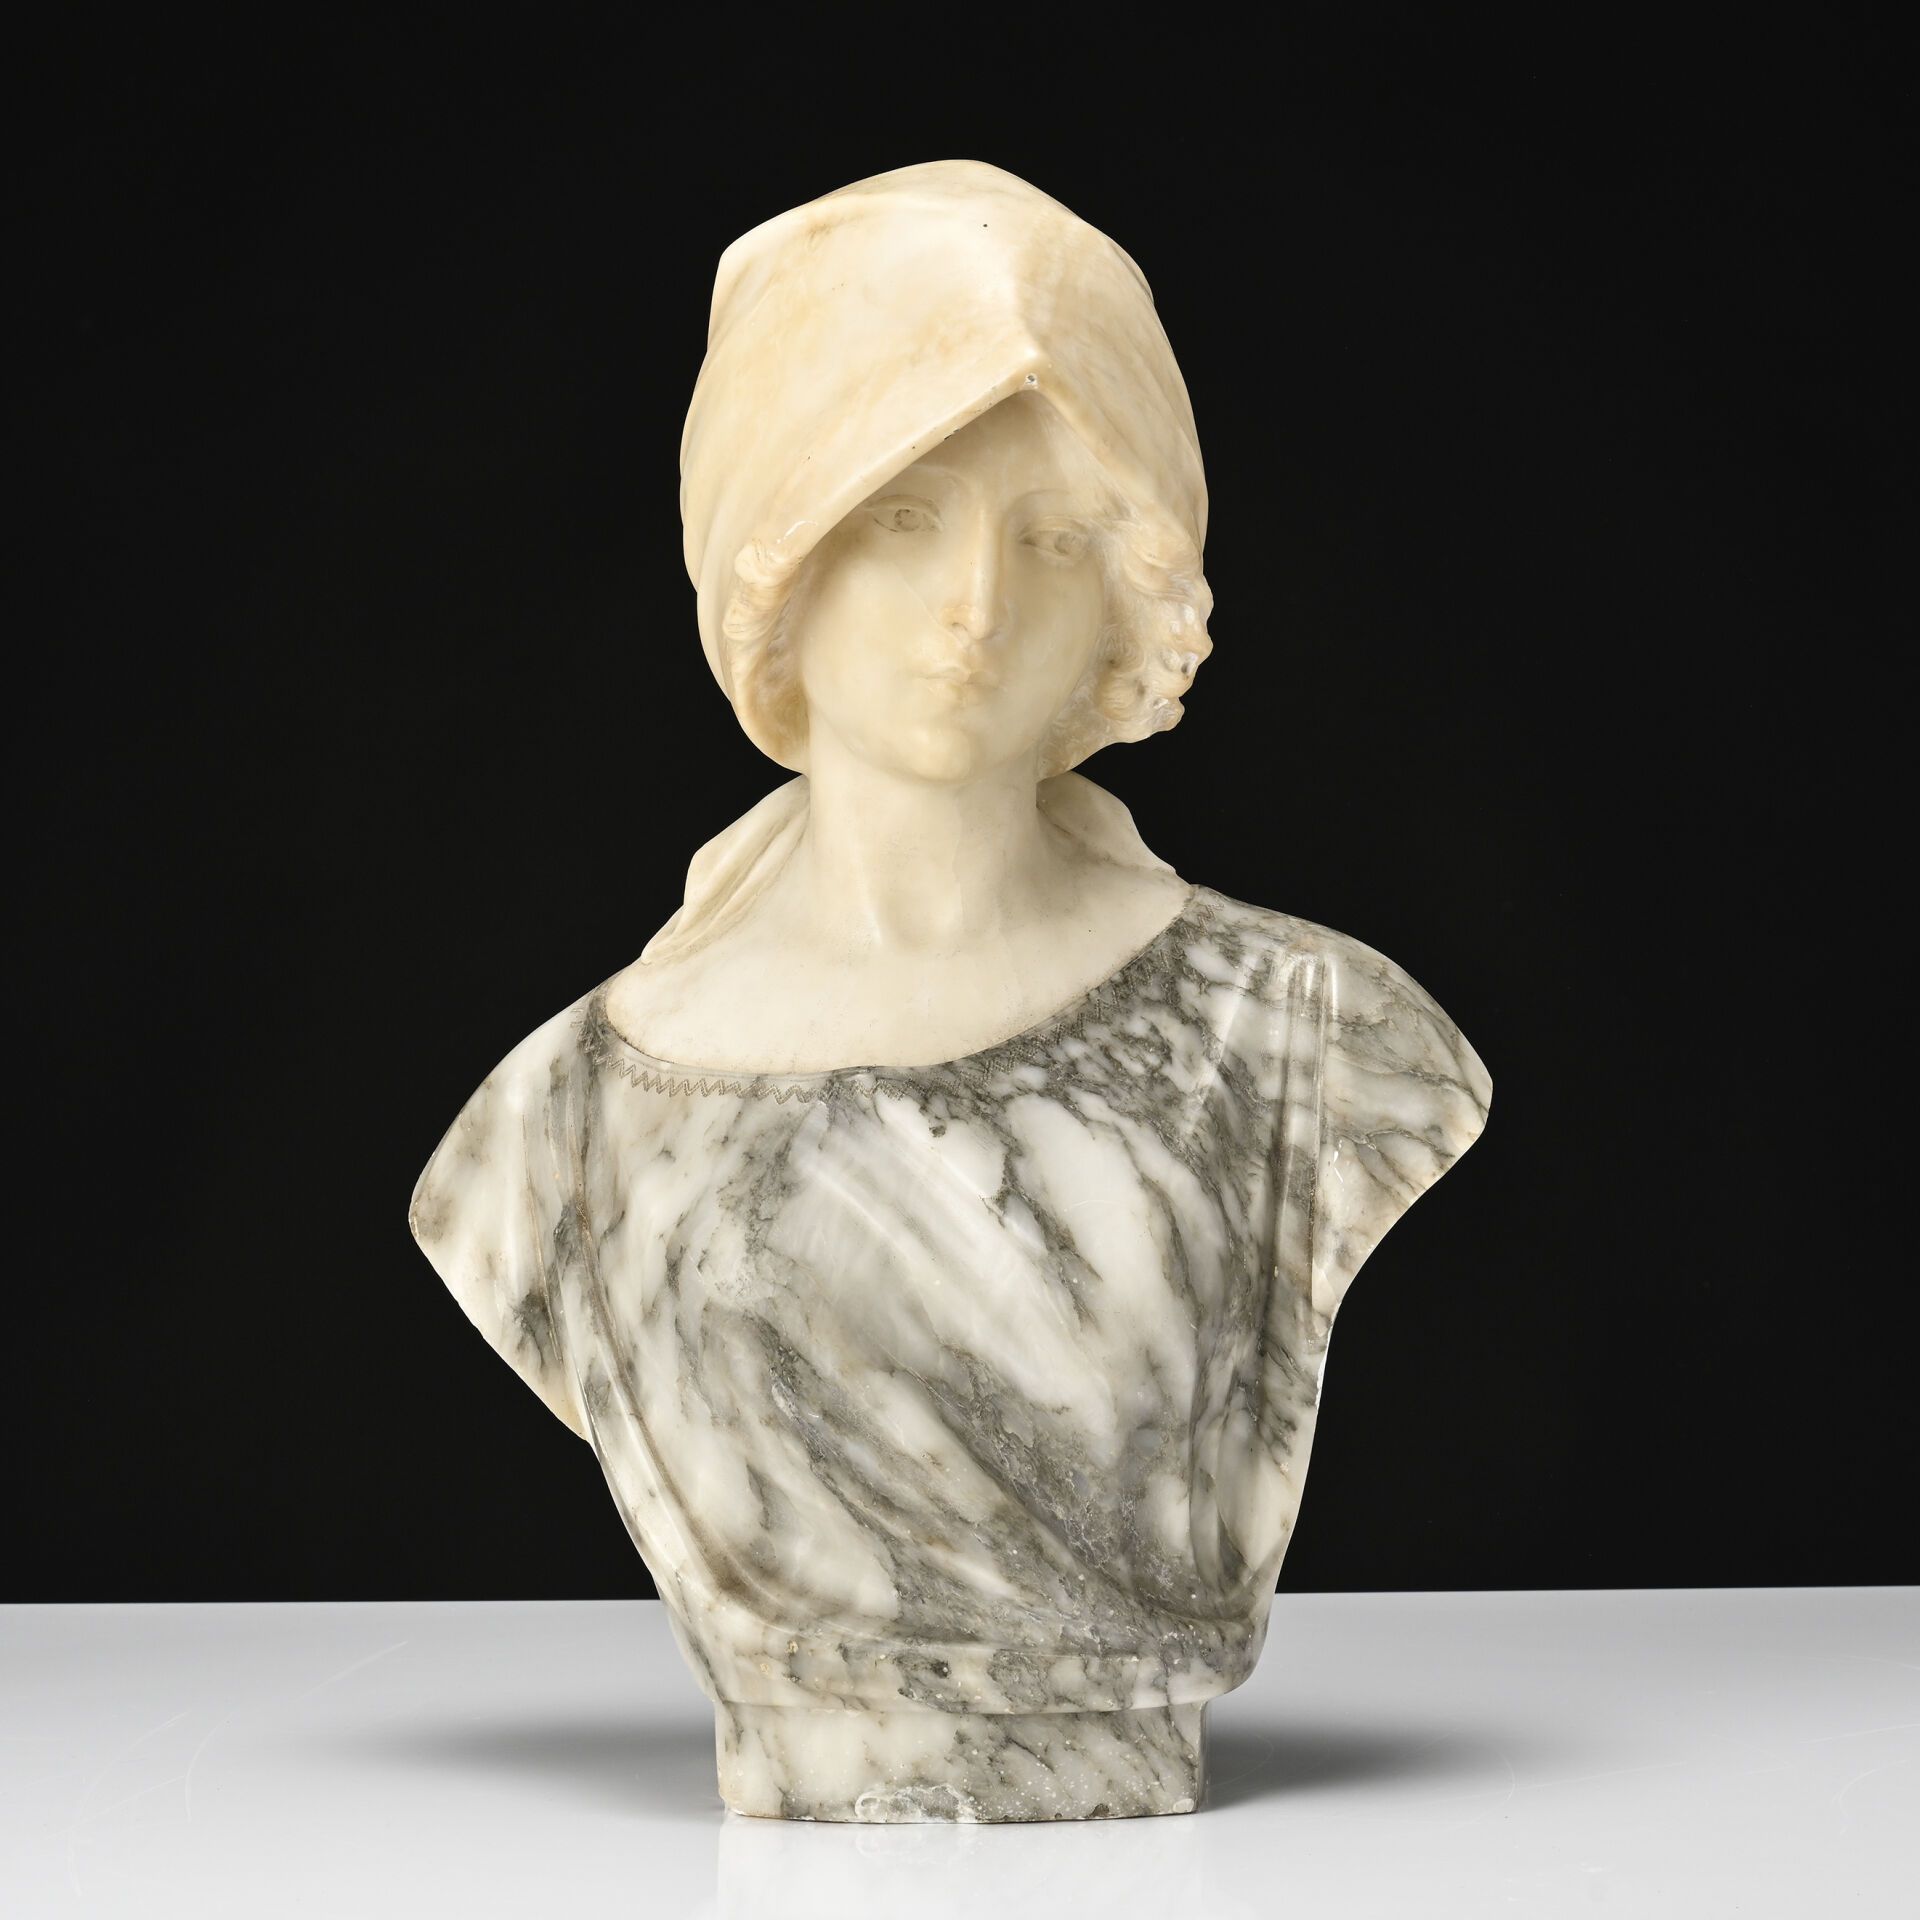 Null Gugliermo PUGI (1850-1915)
Woman's bust 
Subject in marble and veined marbl&hellip;